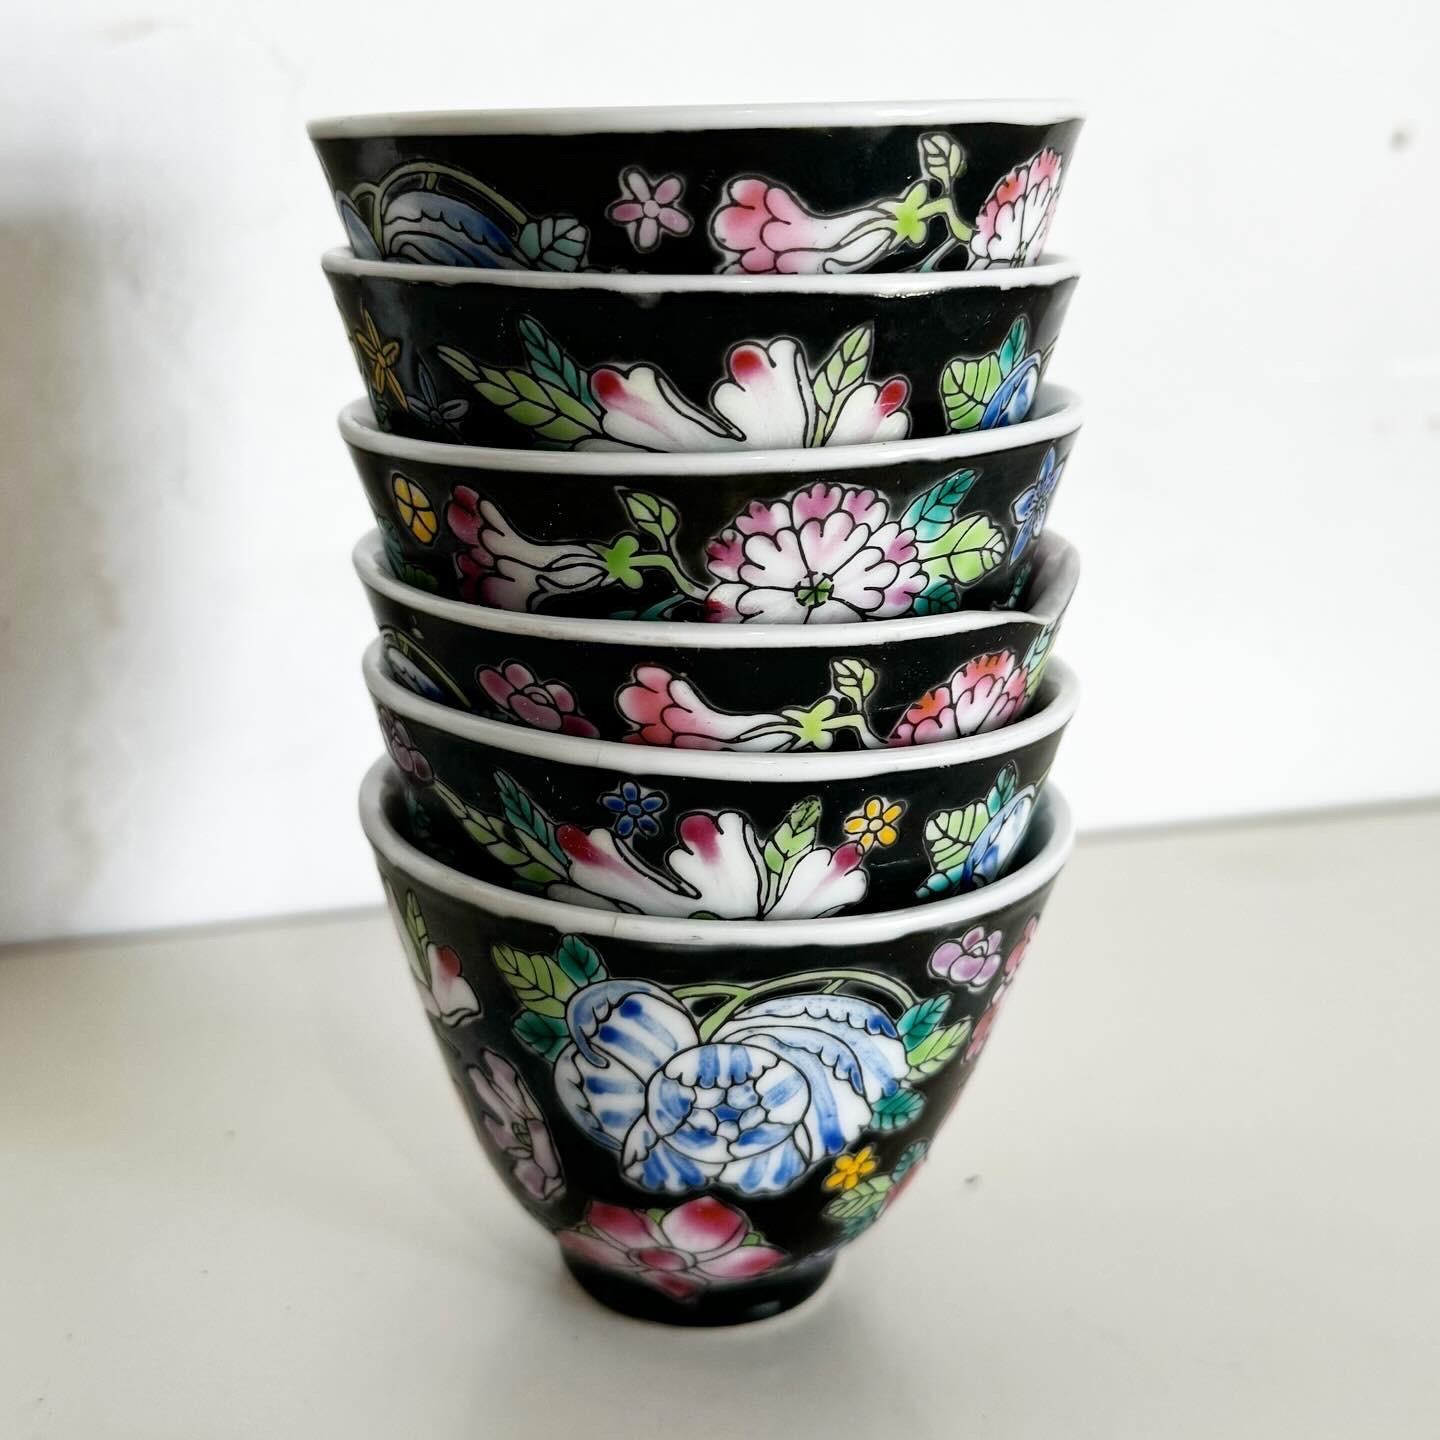 Vintage Chinese Hand Painted Porcelain Tea Cups - Set of 6 In Good Condition For Sale In Delray Beach, FL